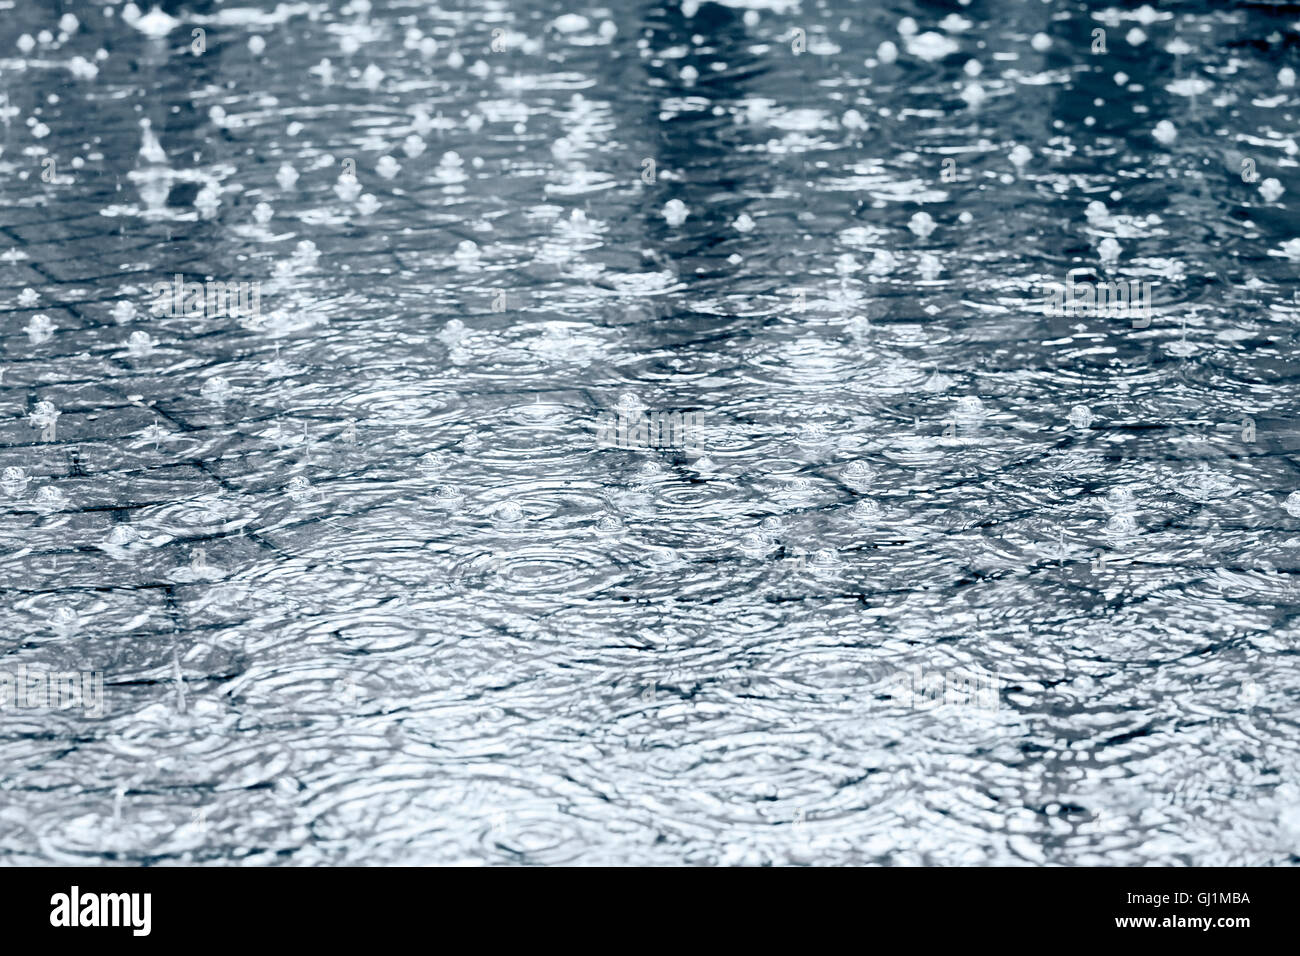 flooded cobblestone pavement with puddles of water and raindrops Stock Photo